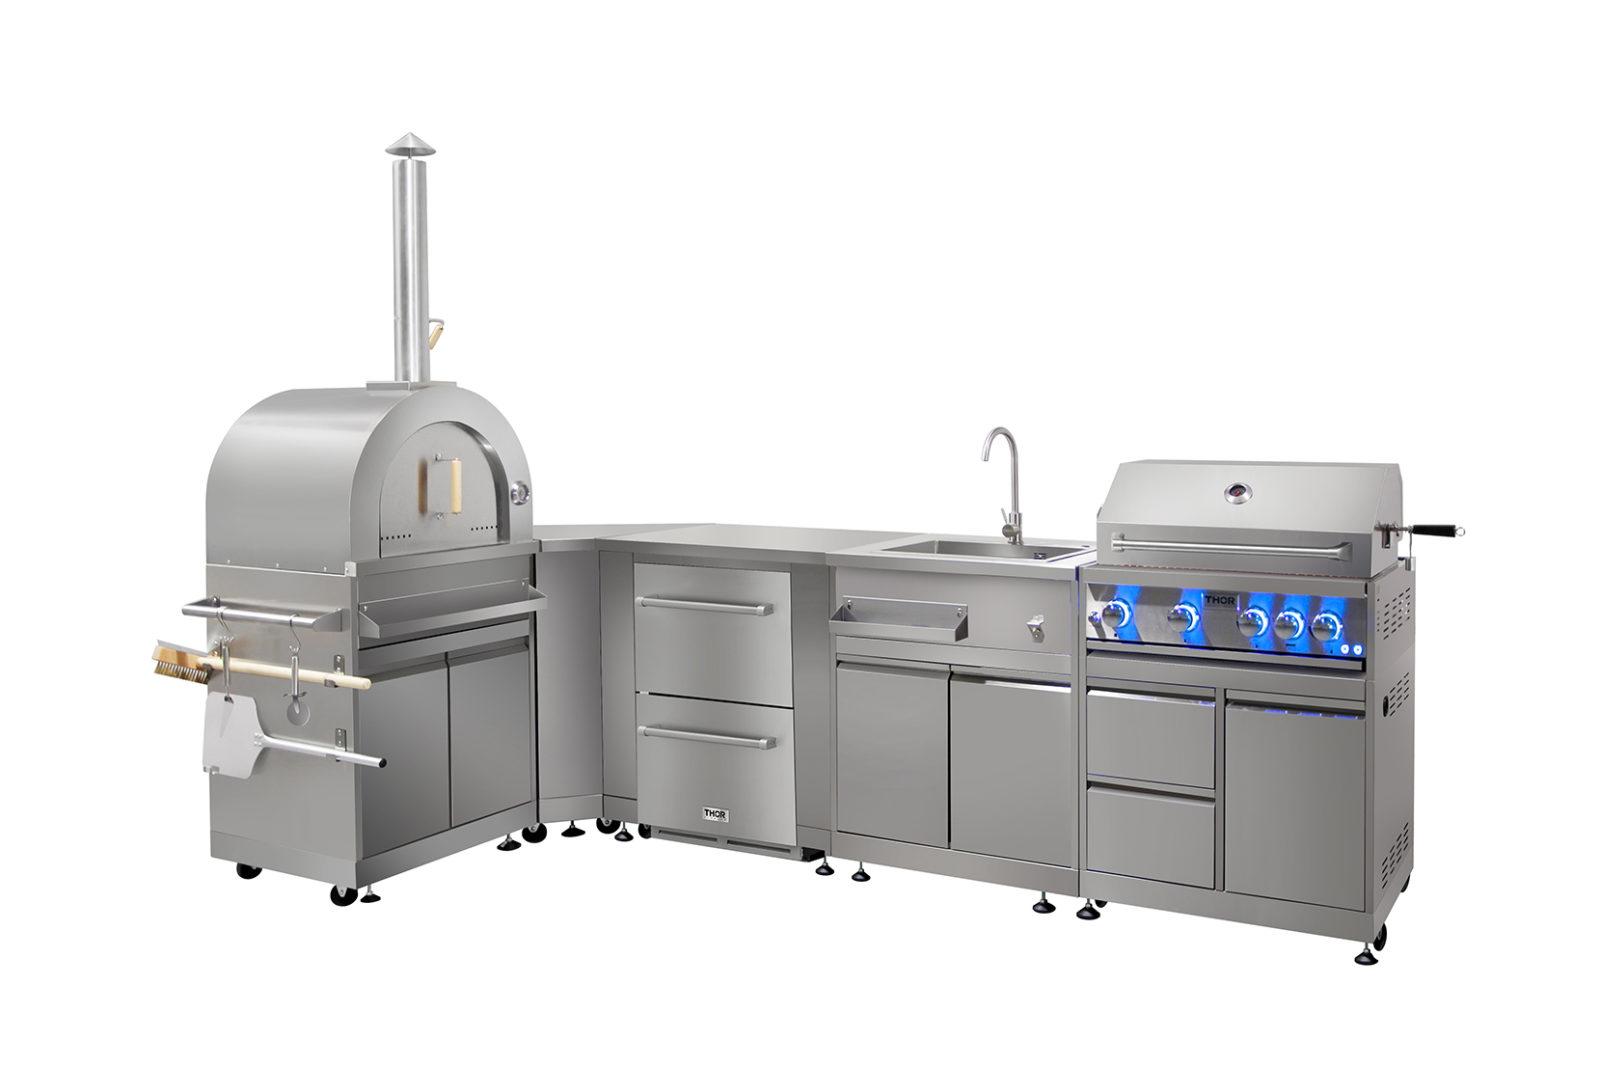 Thor Kitchen Outdoor Kitchen Pizza Oven and Cabinet In Stainless Steel